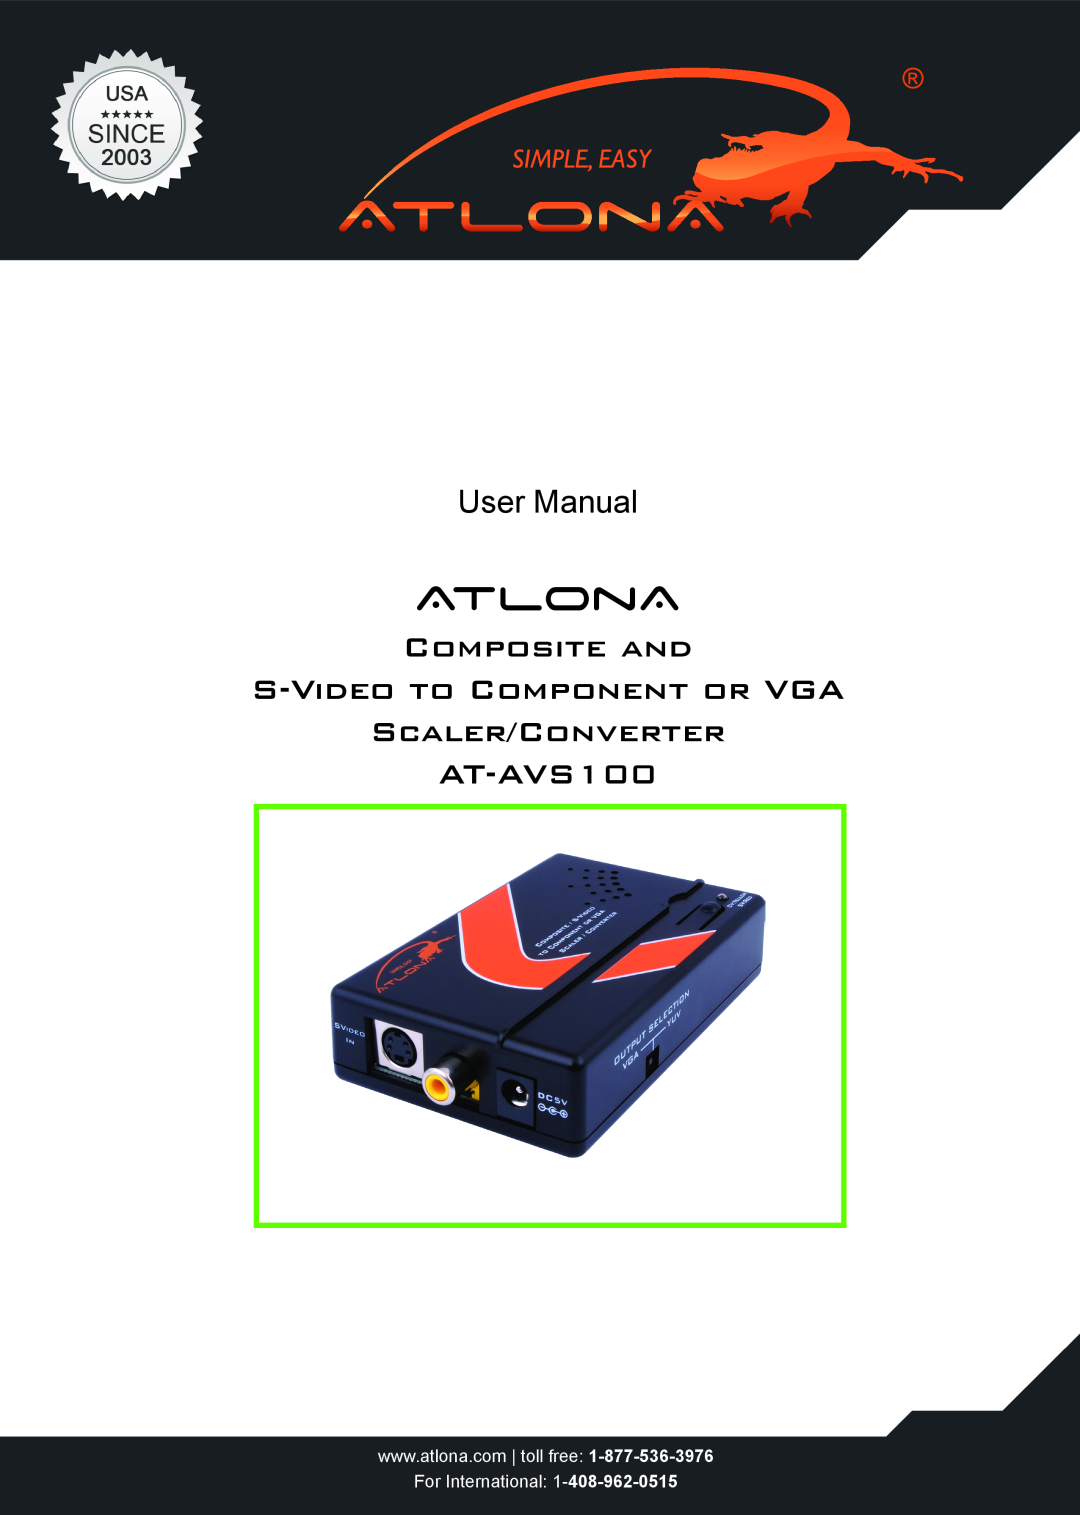 Atlona user manual Composite or S-Video Scaler/Converter to Component or VGA AT-AVS100, User Manual, Toll free, Local 